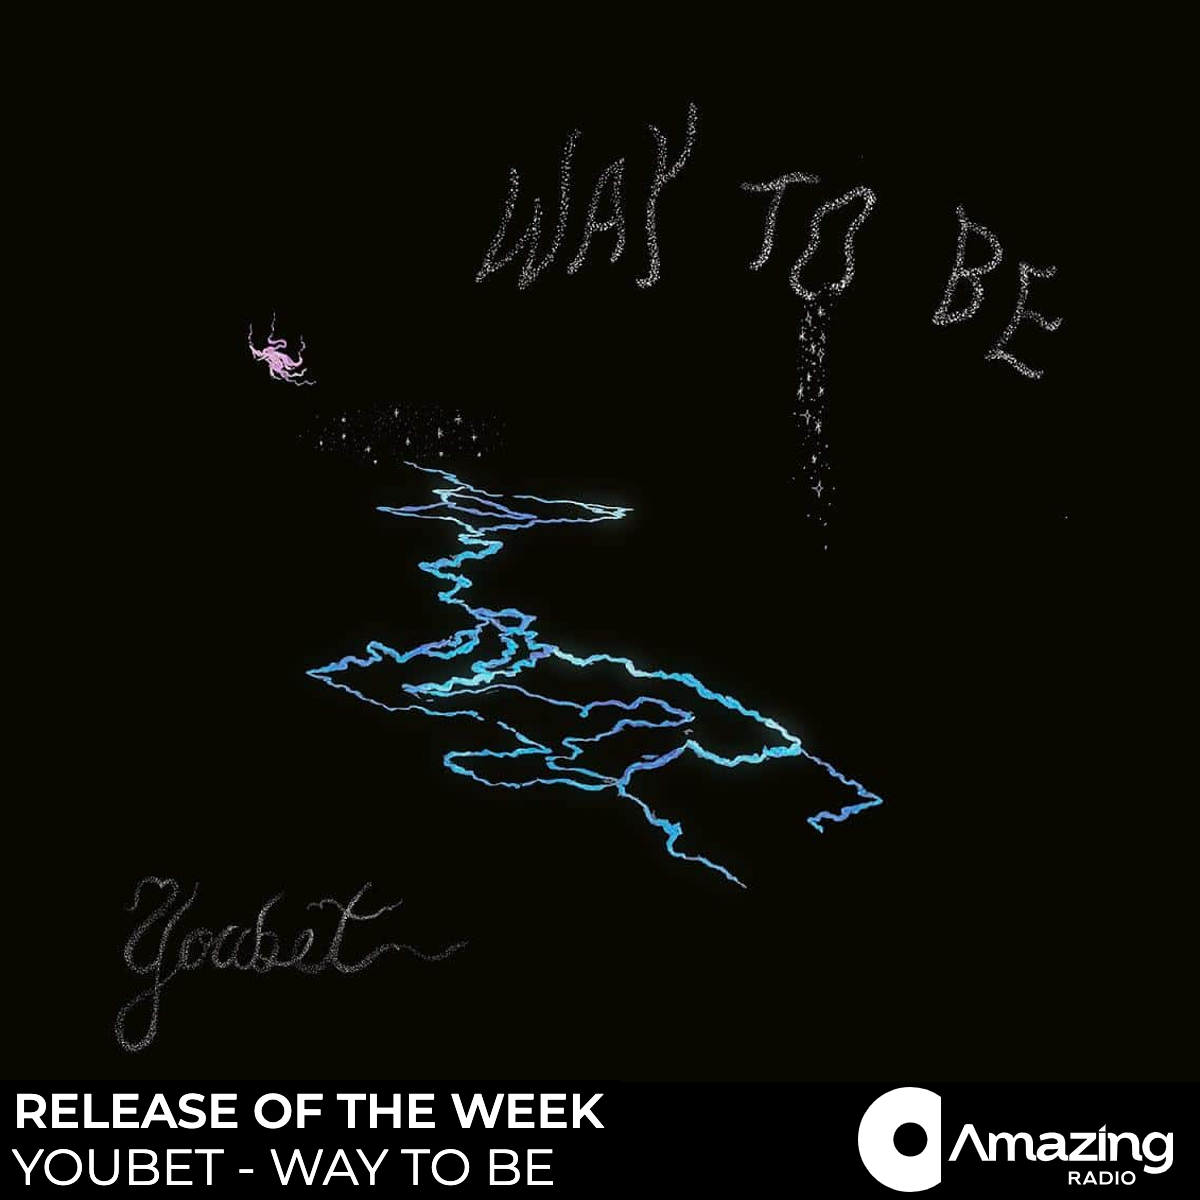 .@hardlyart debut by @youbetband is a layered melodic pop-rock arrangements, fusing rock & electronic instrumentation with poignant, witty lyrics. 'Way To Be' is our Release of the Week! We are playing it, in full, this Friday, at 11am PT / 1pm CT / 2pm ET on @AmazingRadioUSA 🎶